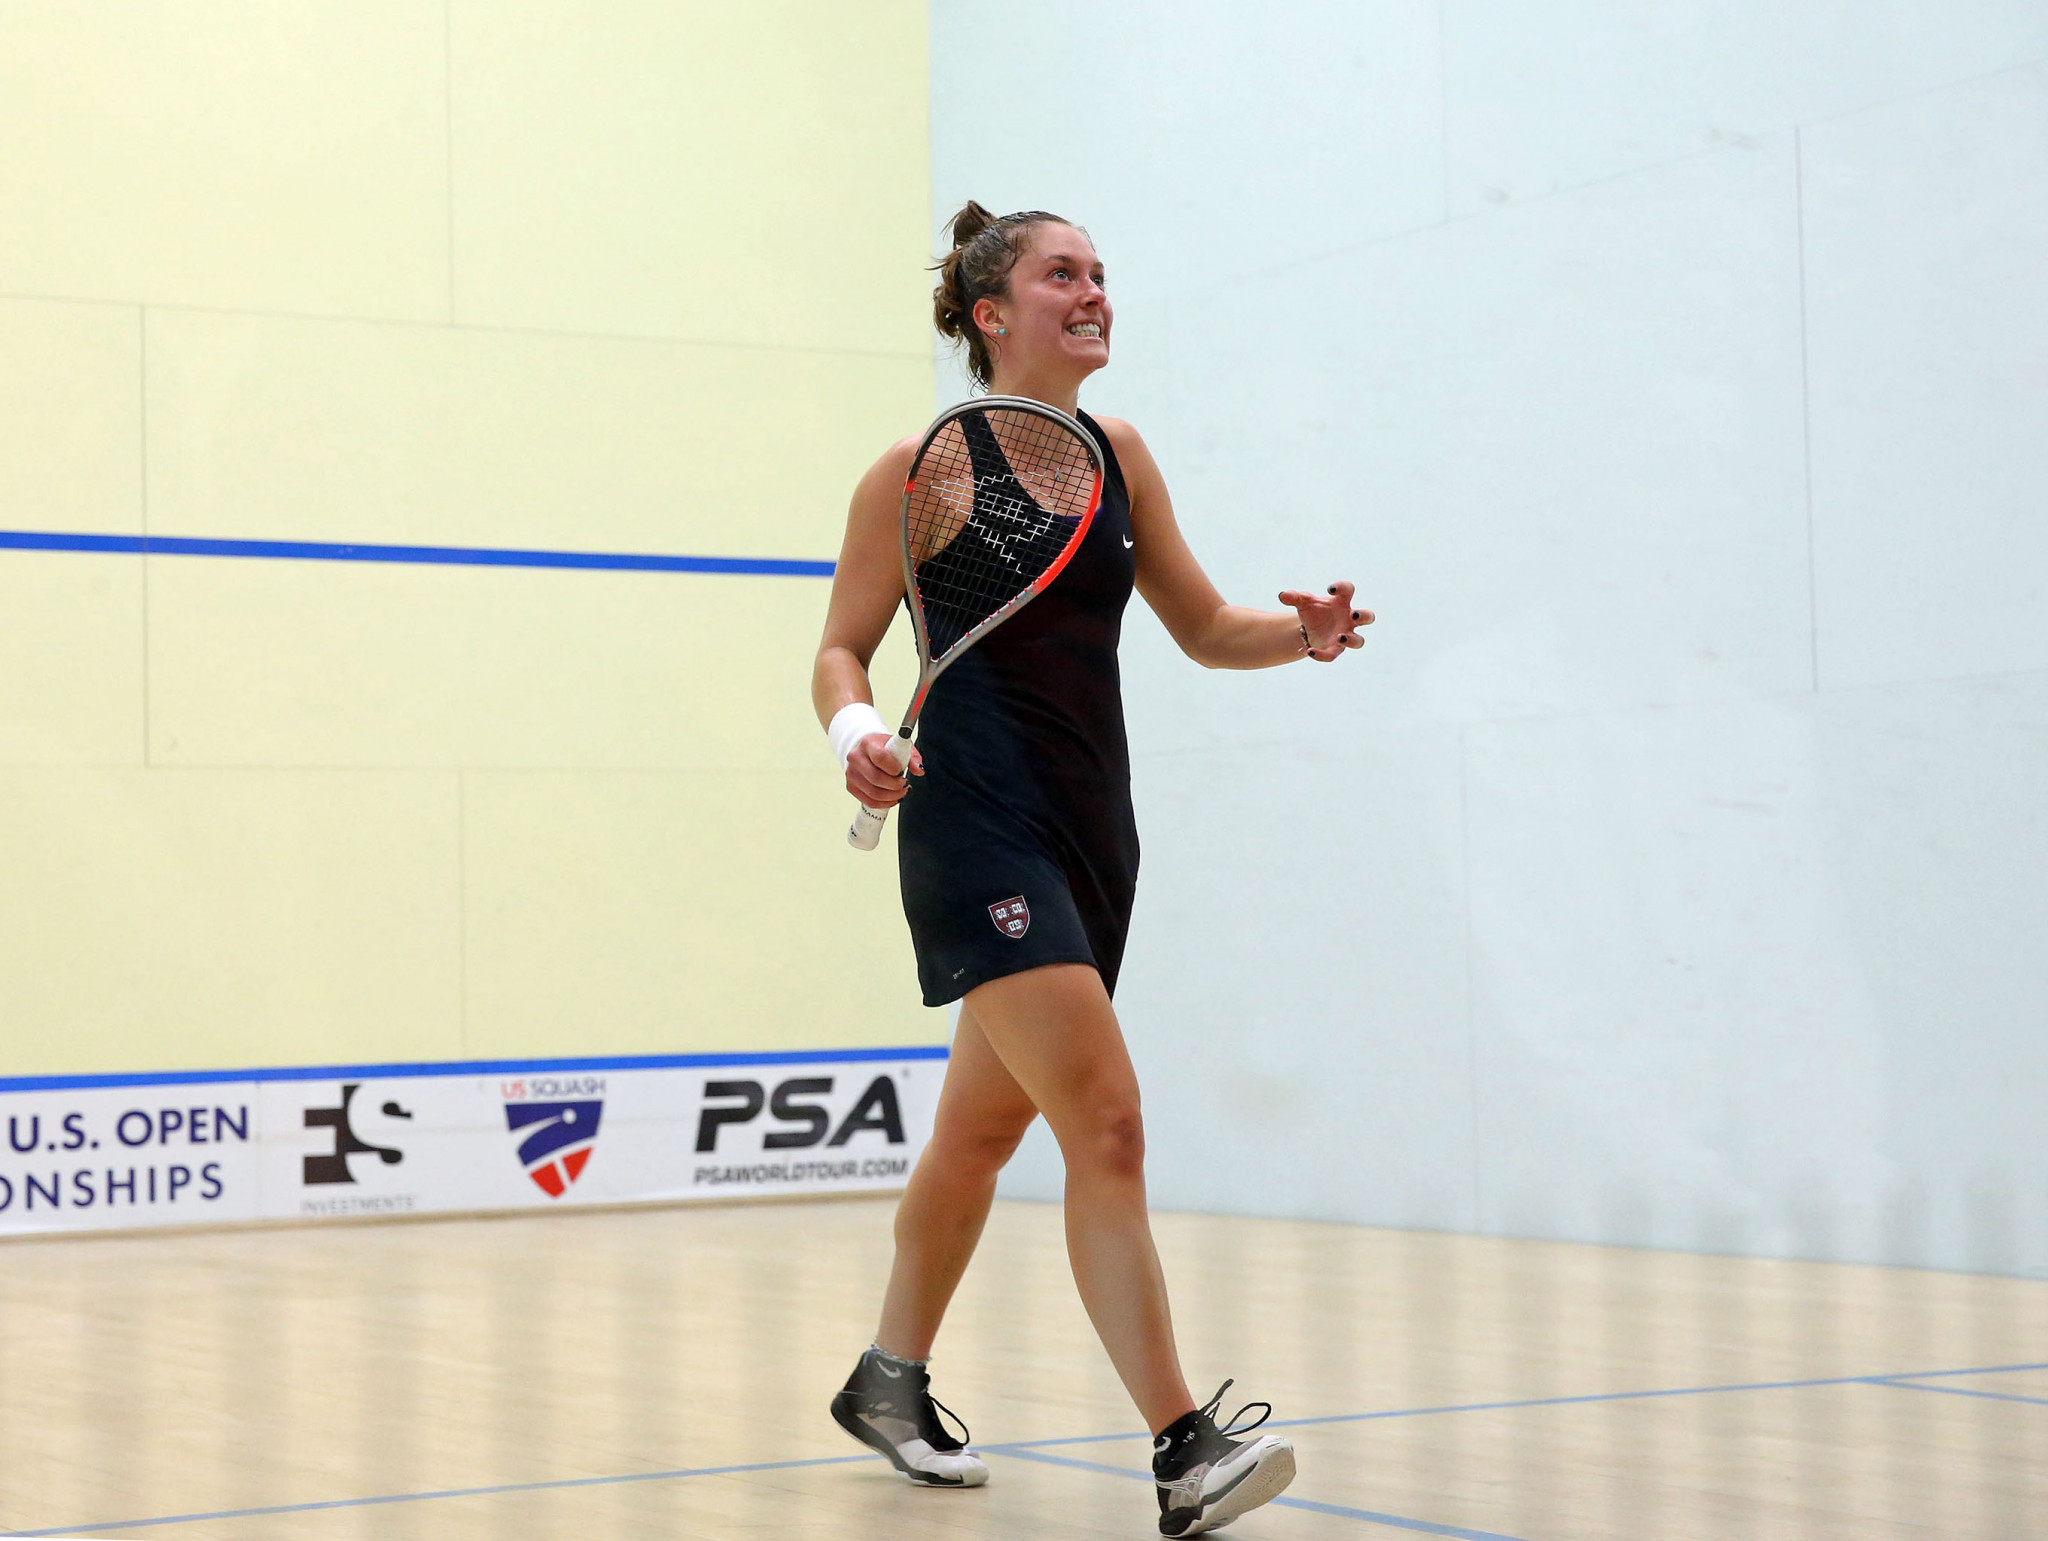 Wildcard Sabrina Sobhy of the United States will play second seed Camille Serne in the next round of the PSA U.S. Open after returning to the tournament following a three-year absence ©PSA